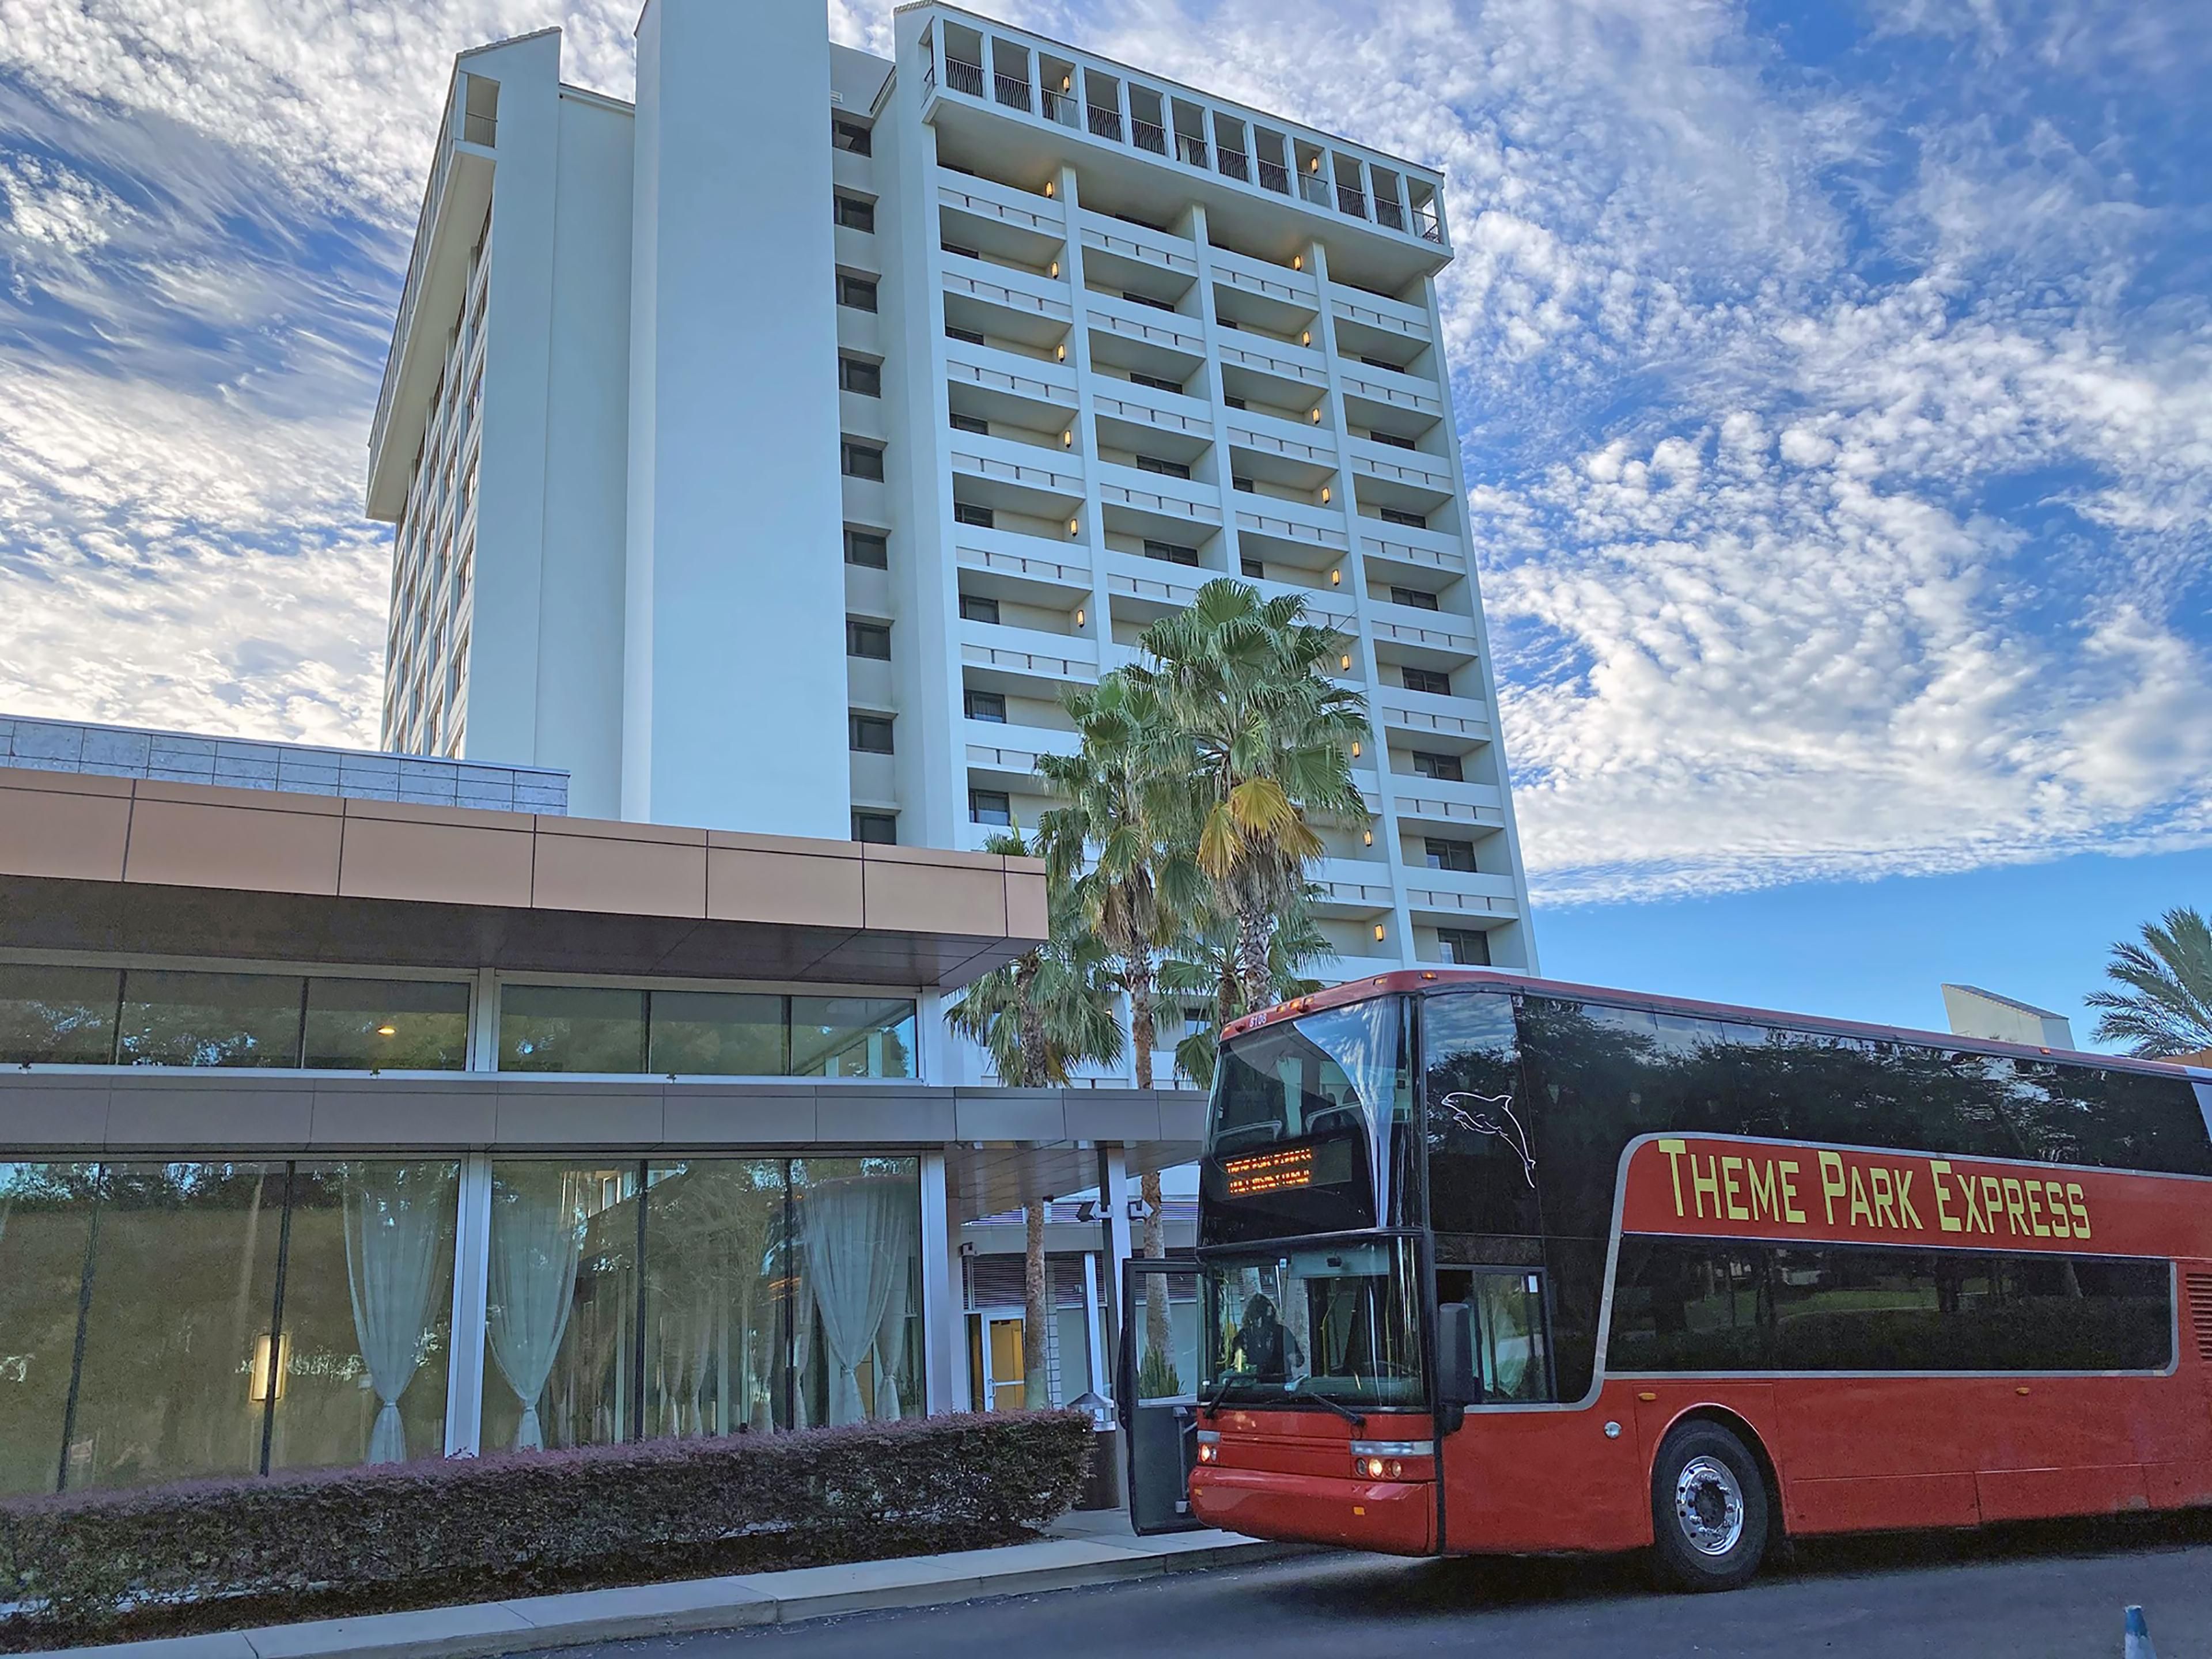 We offer hourly transportation to all Four Disney Theme Parks. This includes service to:  Magic Kingdom, EPCOT, Hollywood Studios and Animal Kingdom. Reservations are required, please inquire with the front desk.